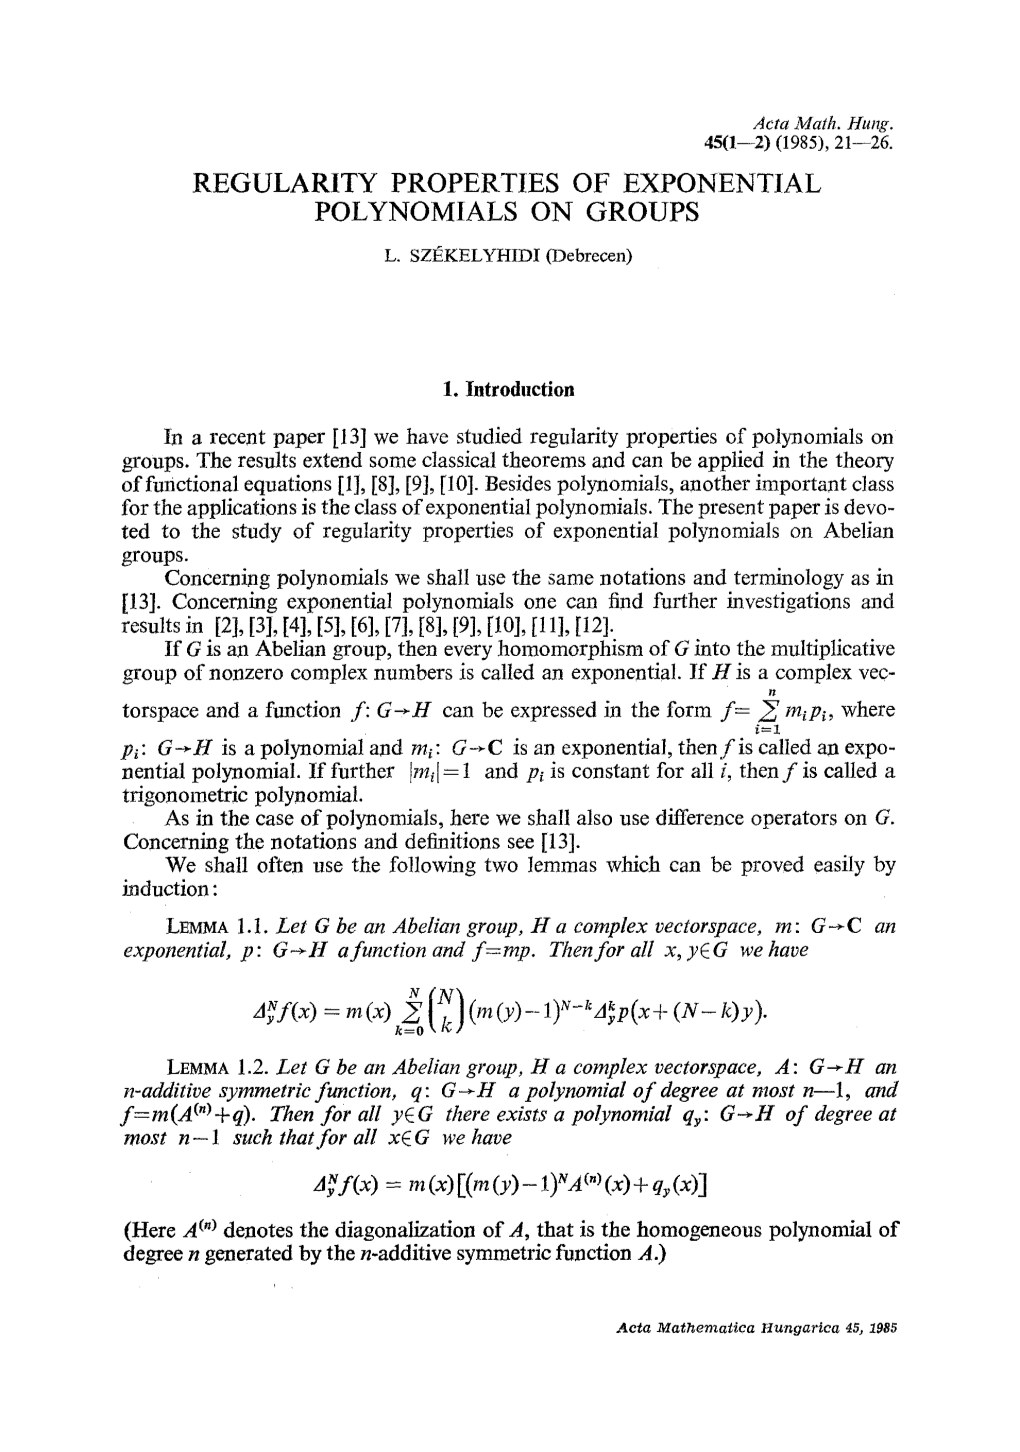 Regularity Properties of Exponential Polynomials on Groups L